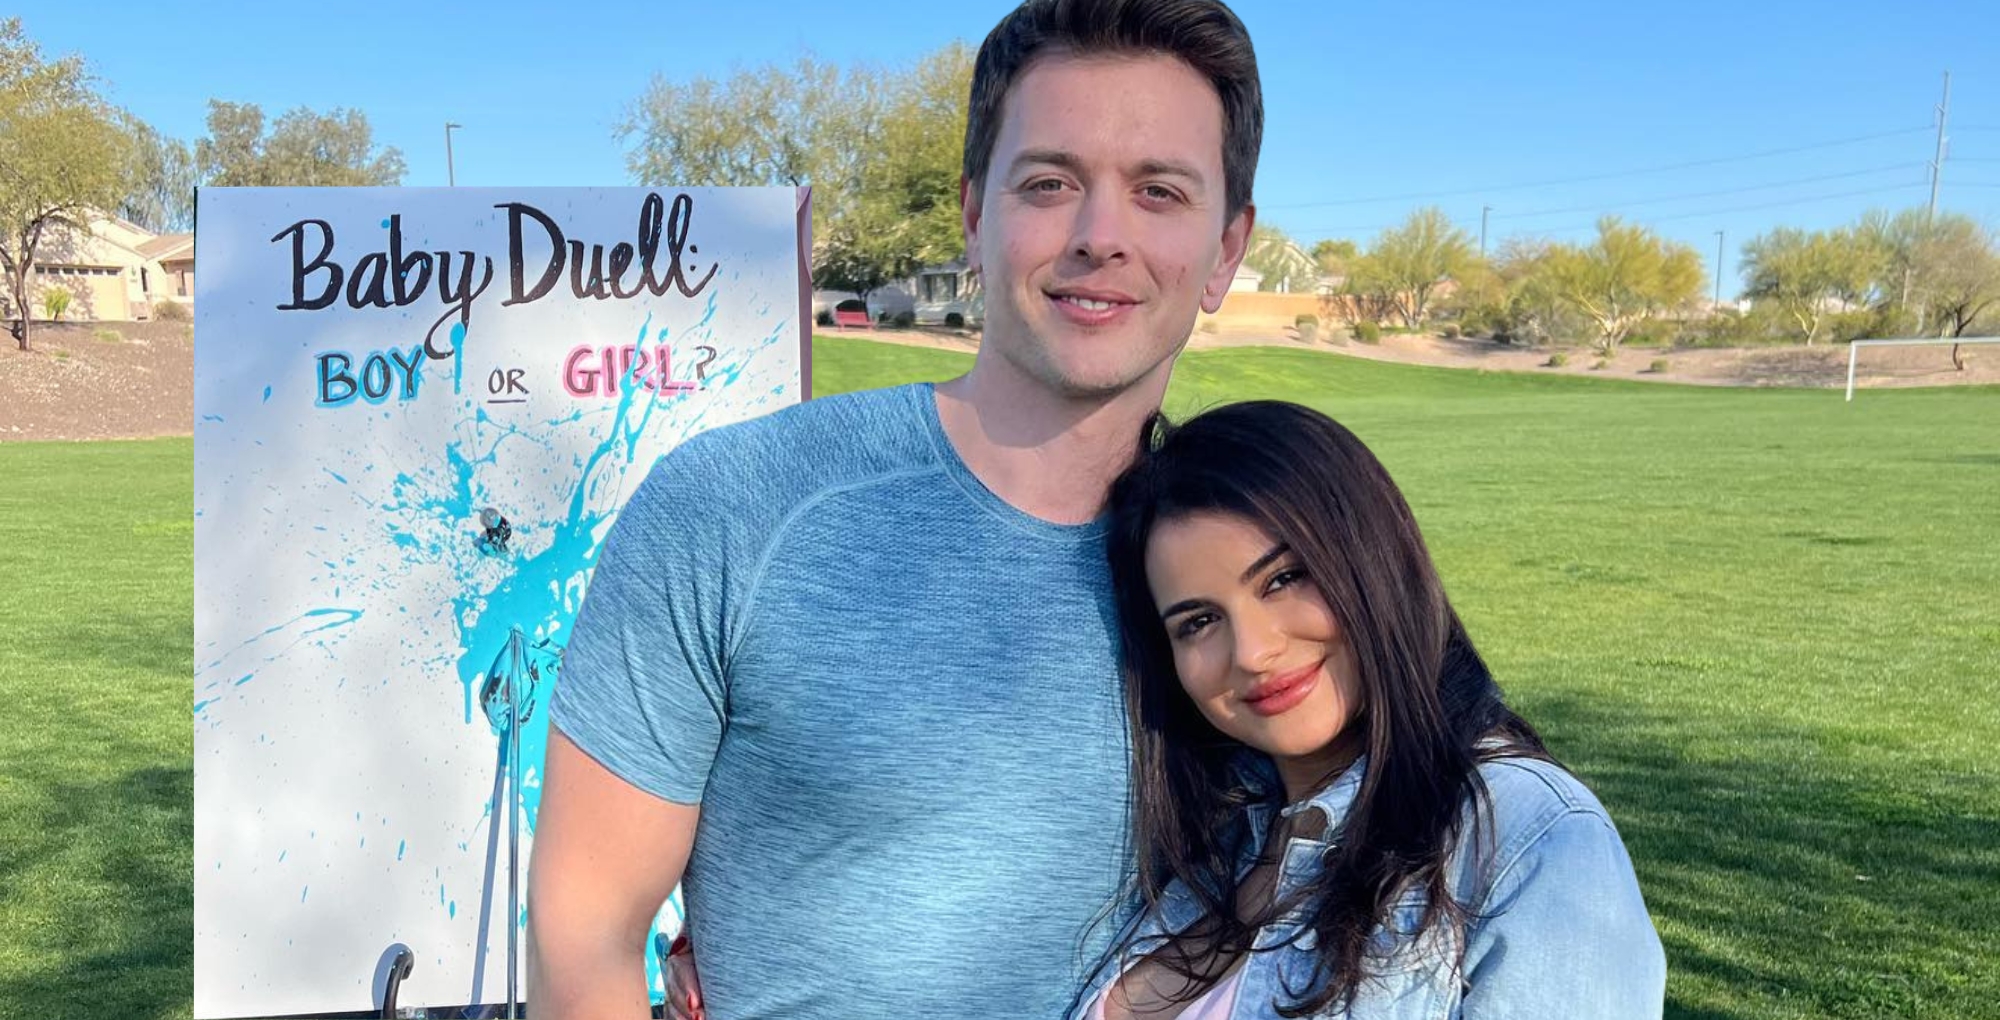 general hospital star chad duell and luna lucci announce they're having a baby.